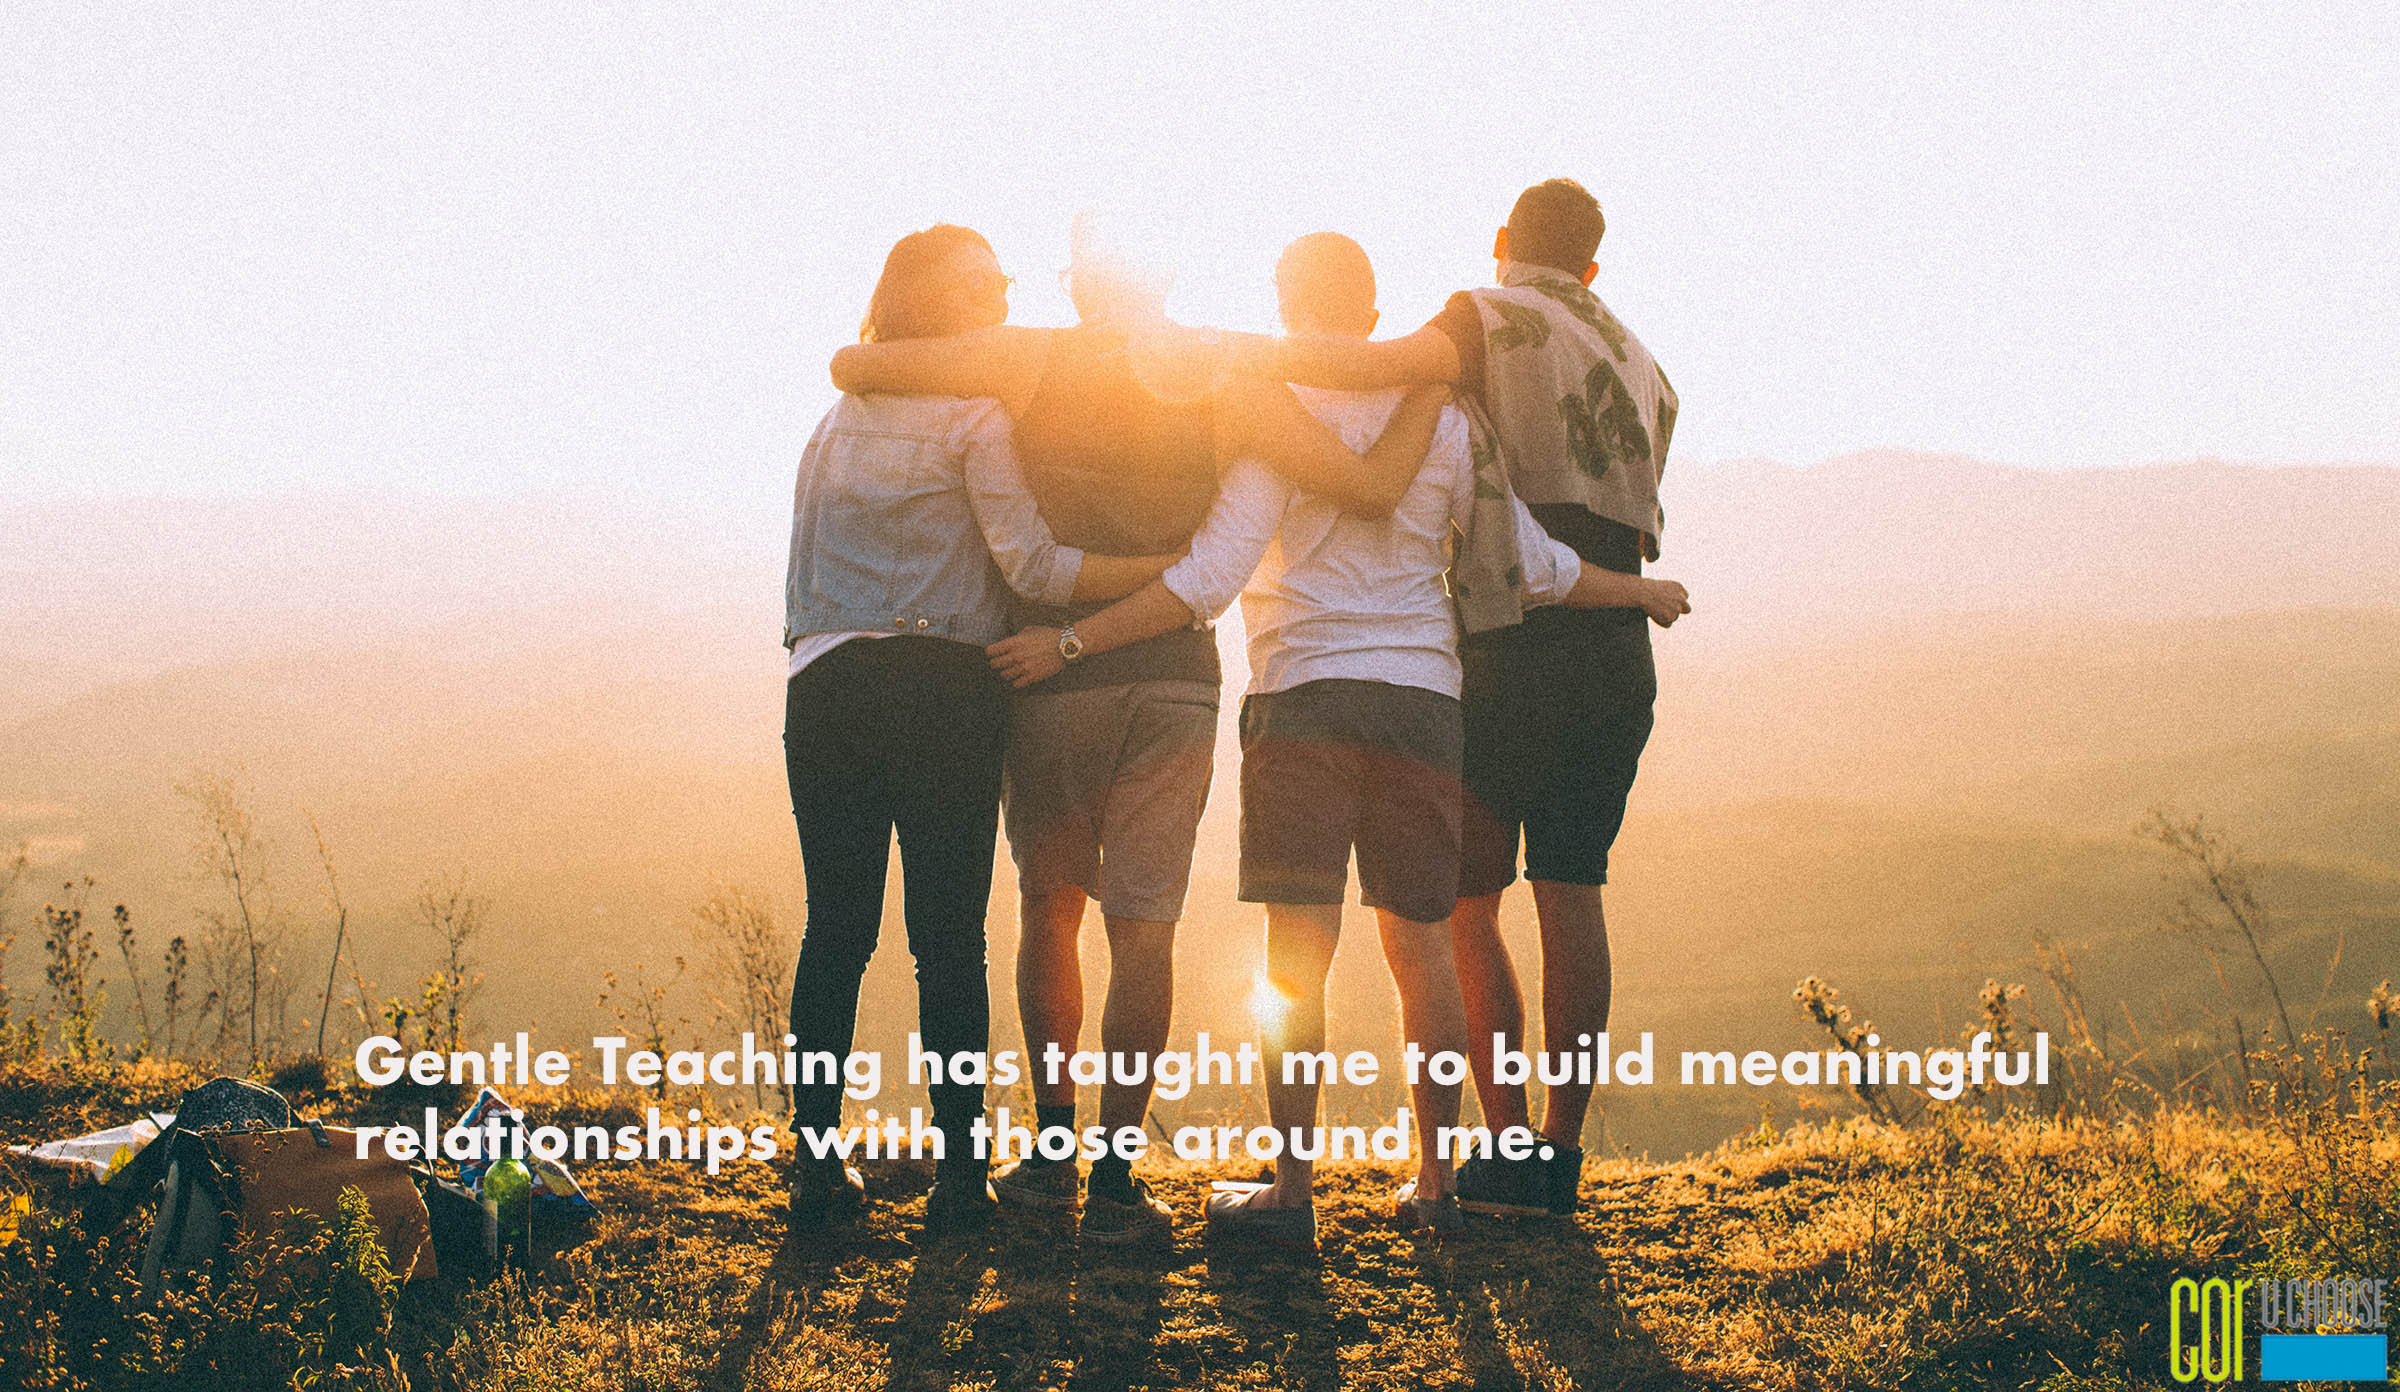 Gentle Teaching has taught me to build meaningful relationships with those around me